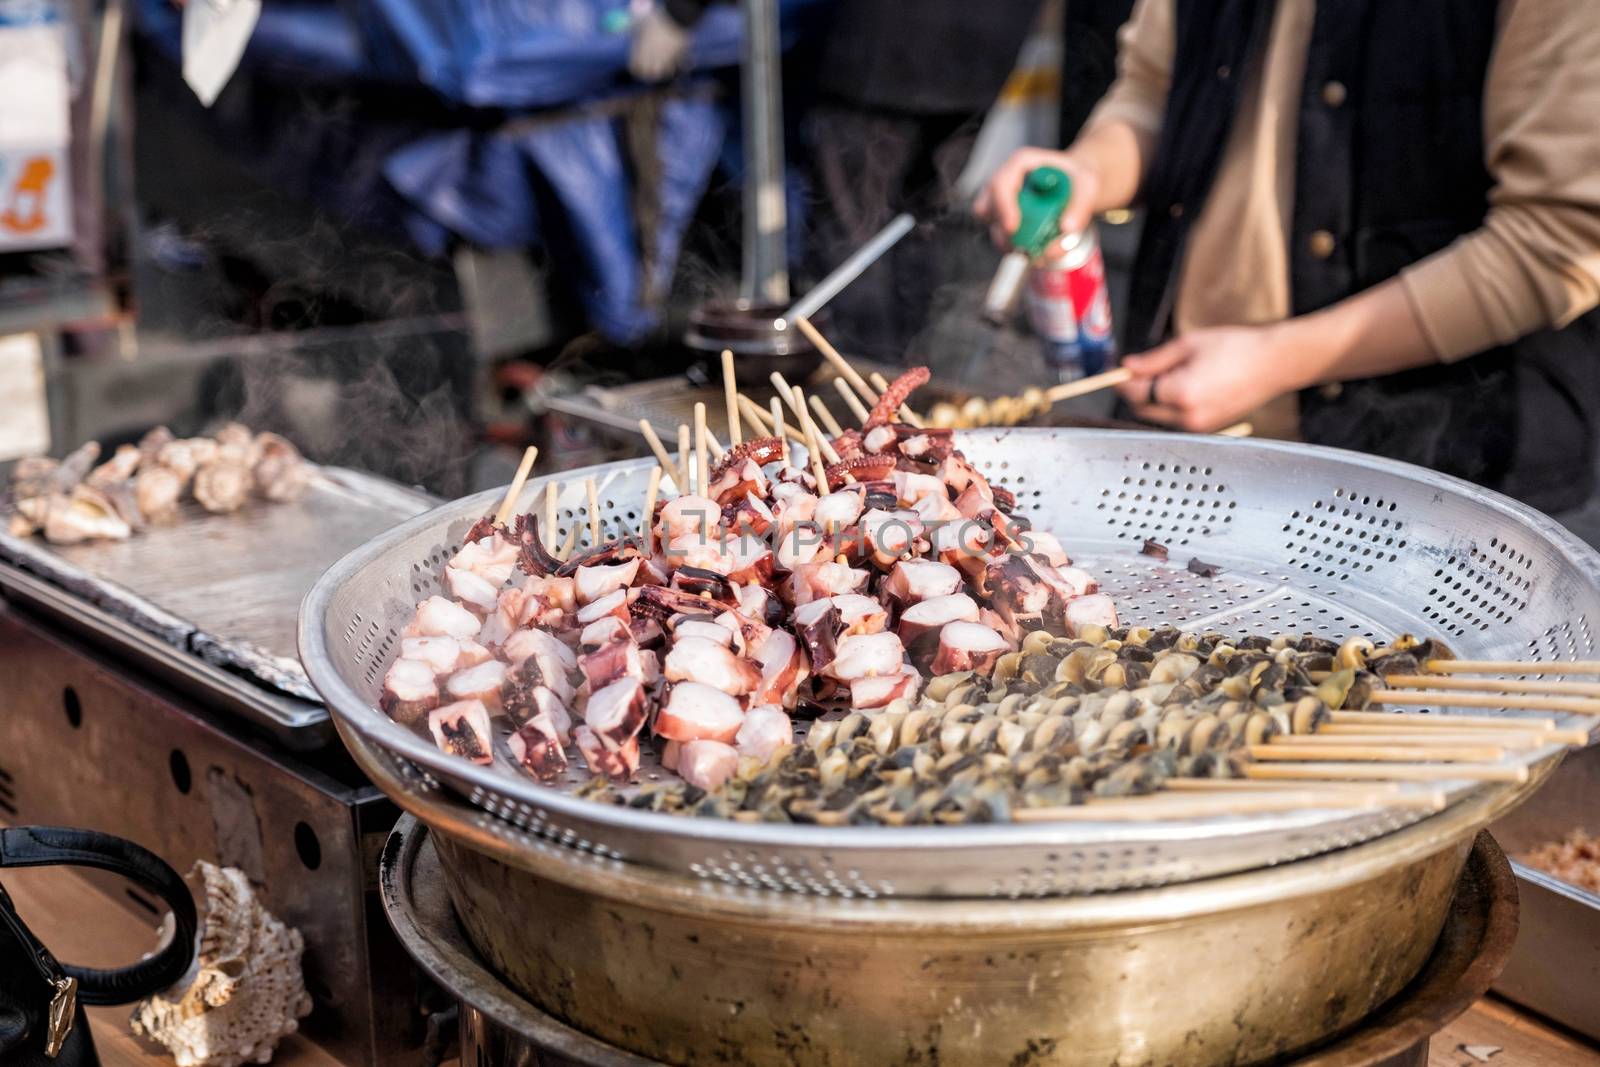 Steamed Octopus Legs  street food at Myeong-dong, Seoul, South Korea